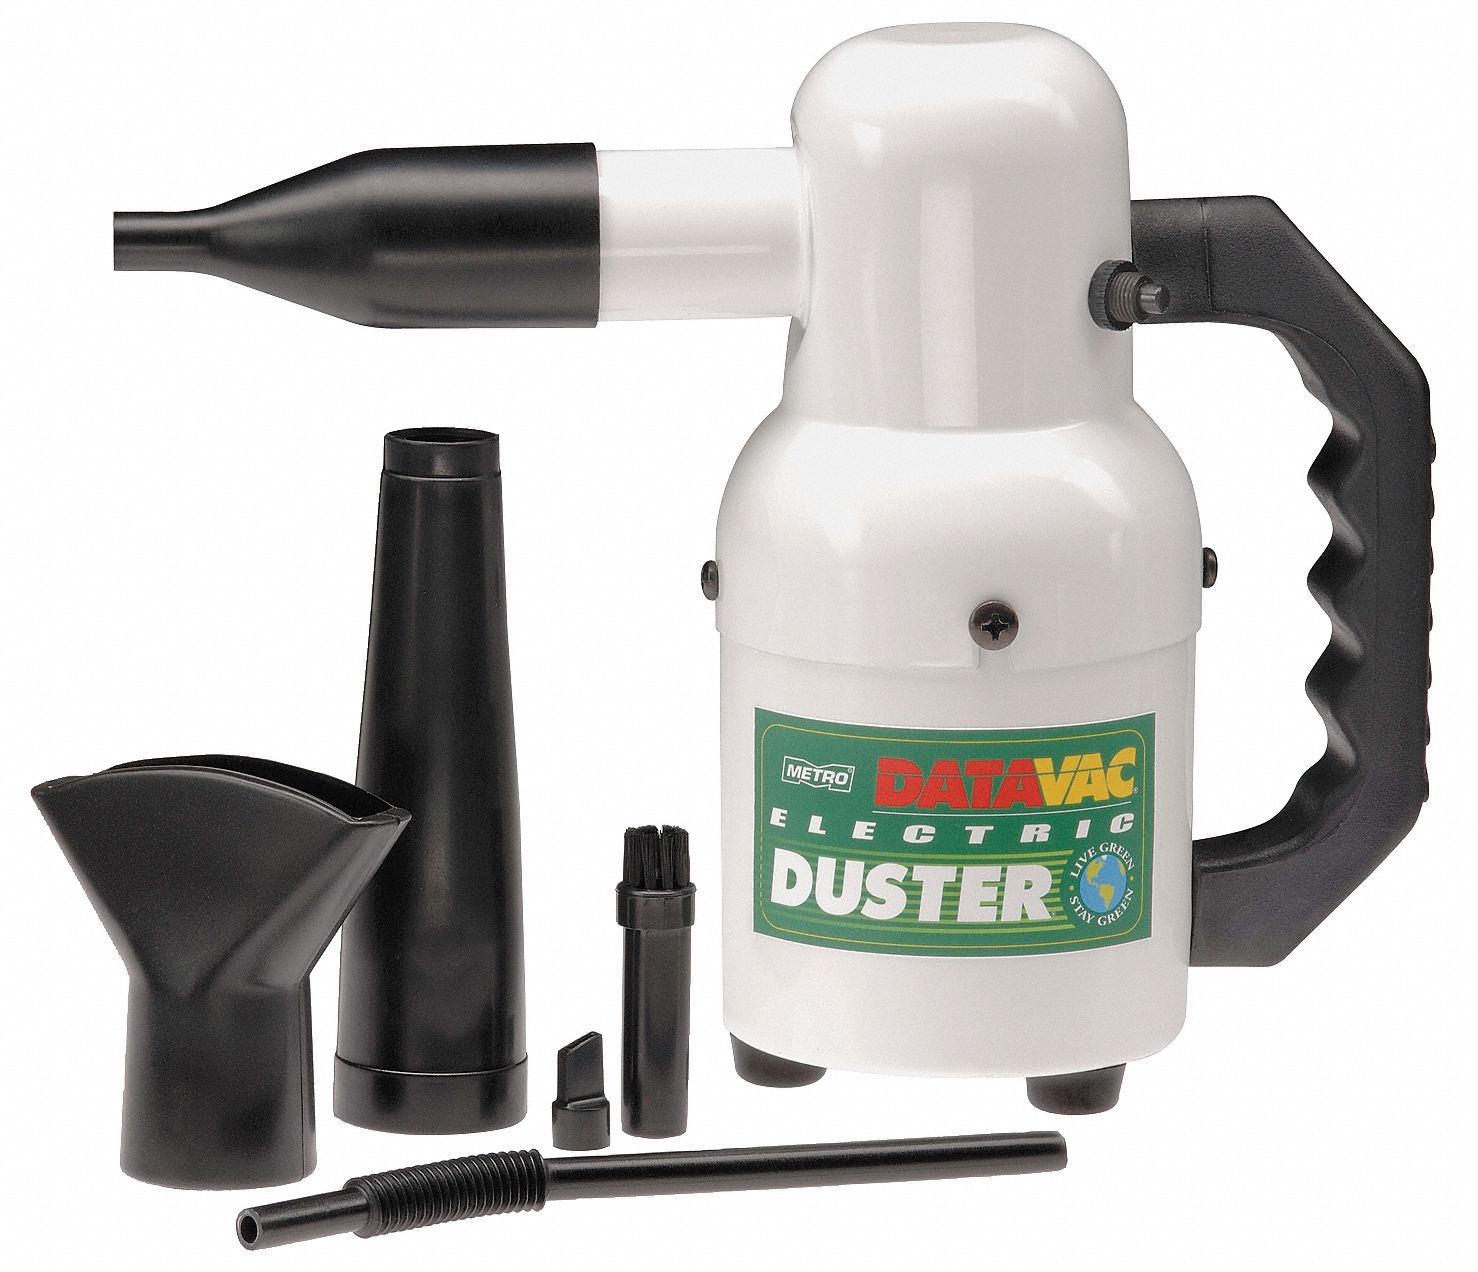 CRITICAL AREA DUSTER,70 CFM,3/4 HP